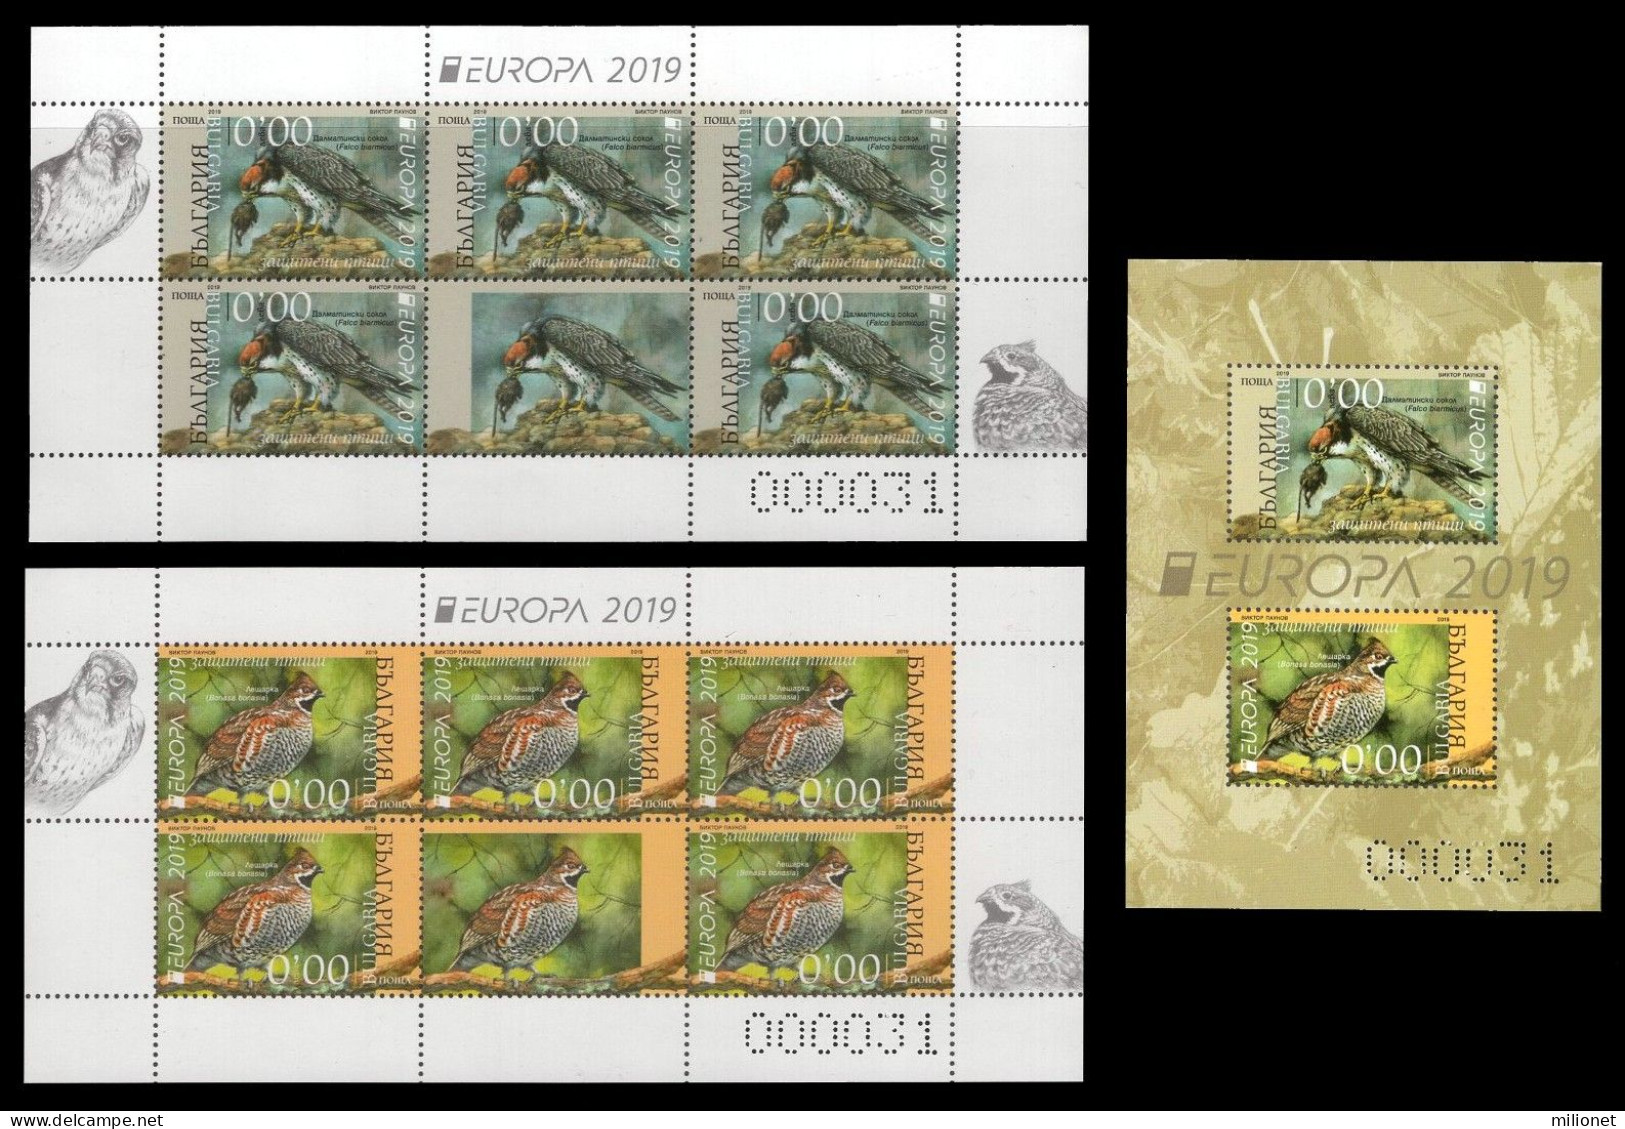 SALE!!! BULGARIA BULGARIE BULGARIEN 2019 EUROPA National Birds 3 Colour Proofs (missing Values & Imperforated) MNH ** - 2019